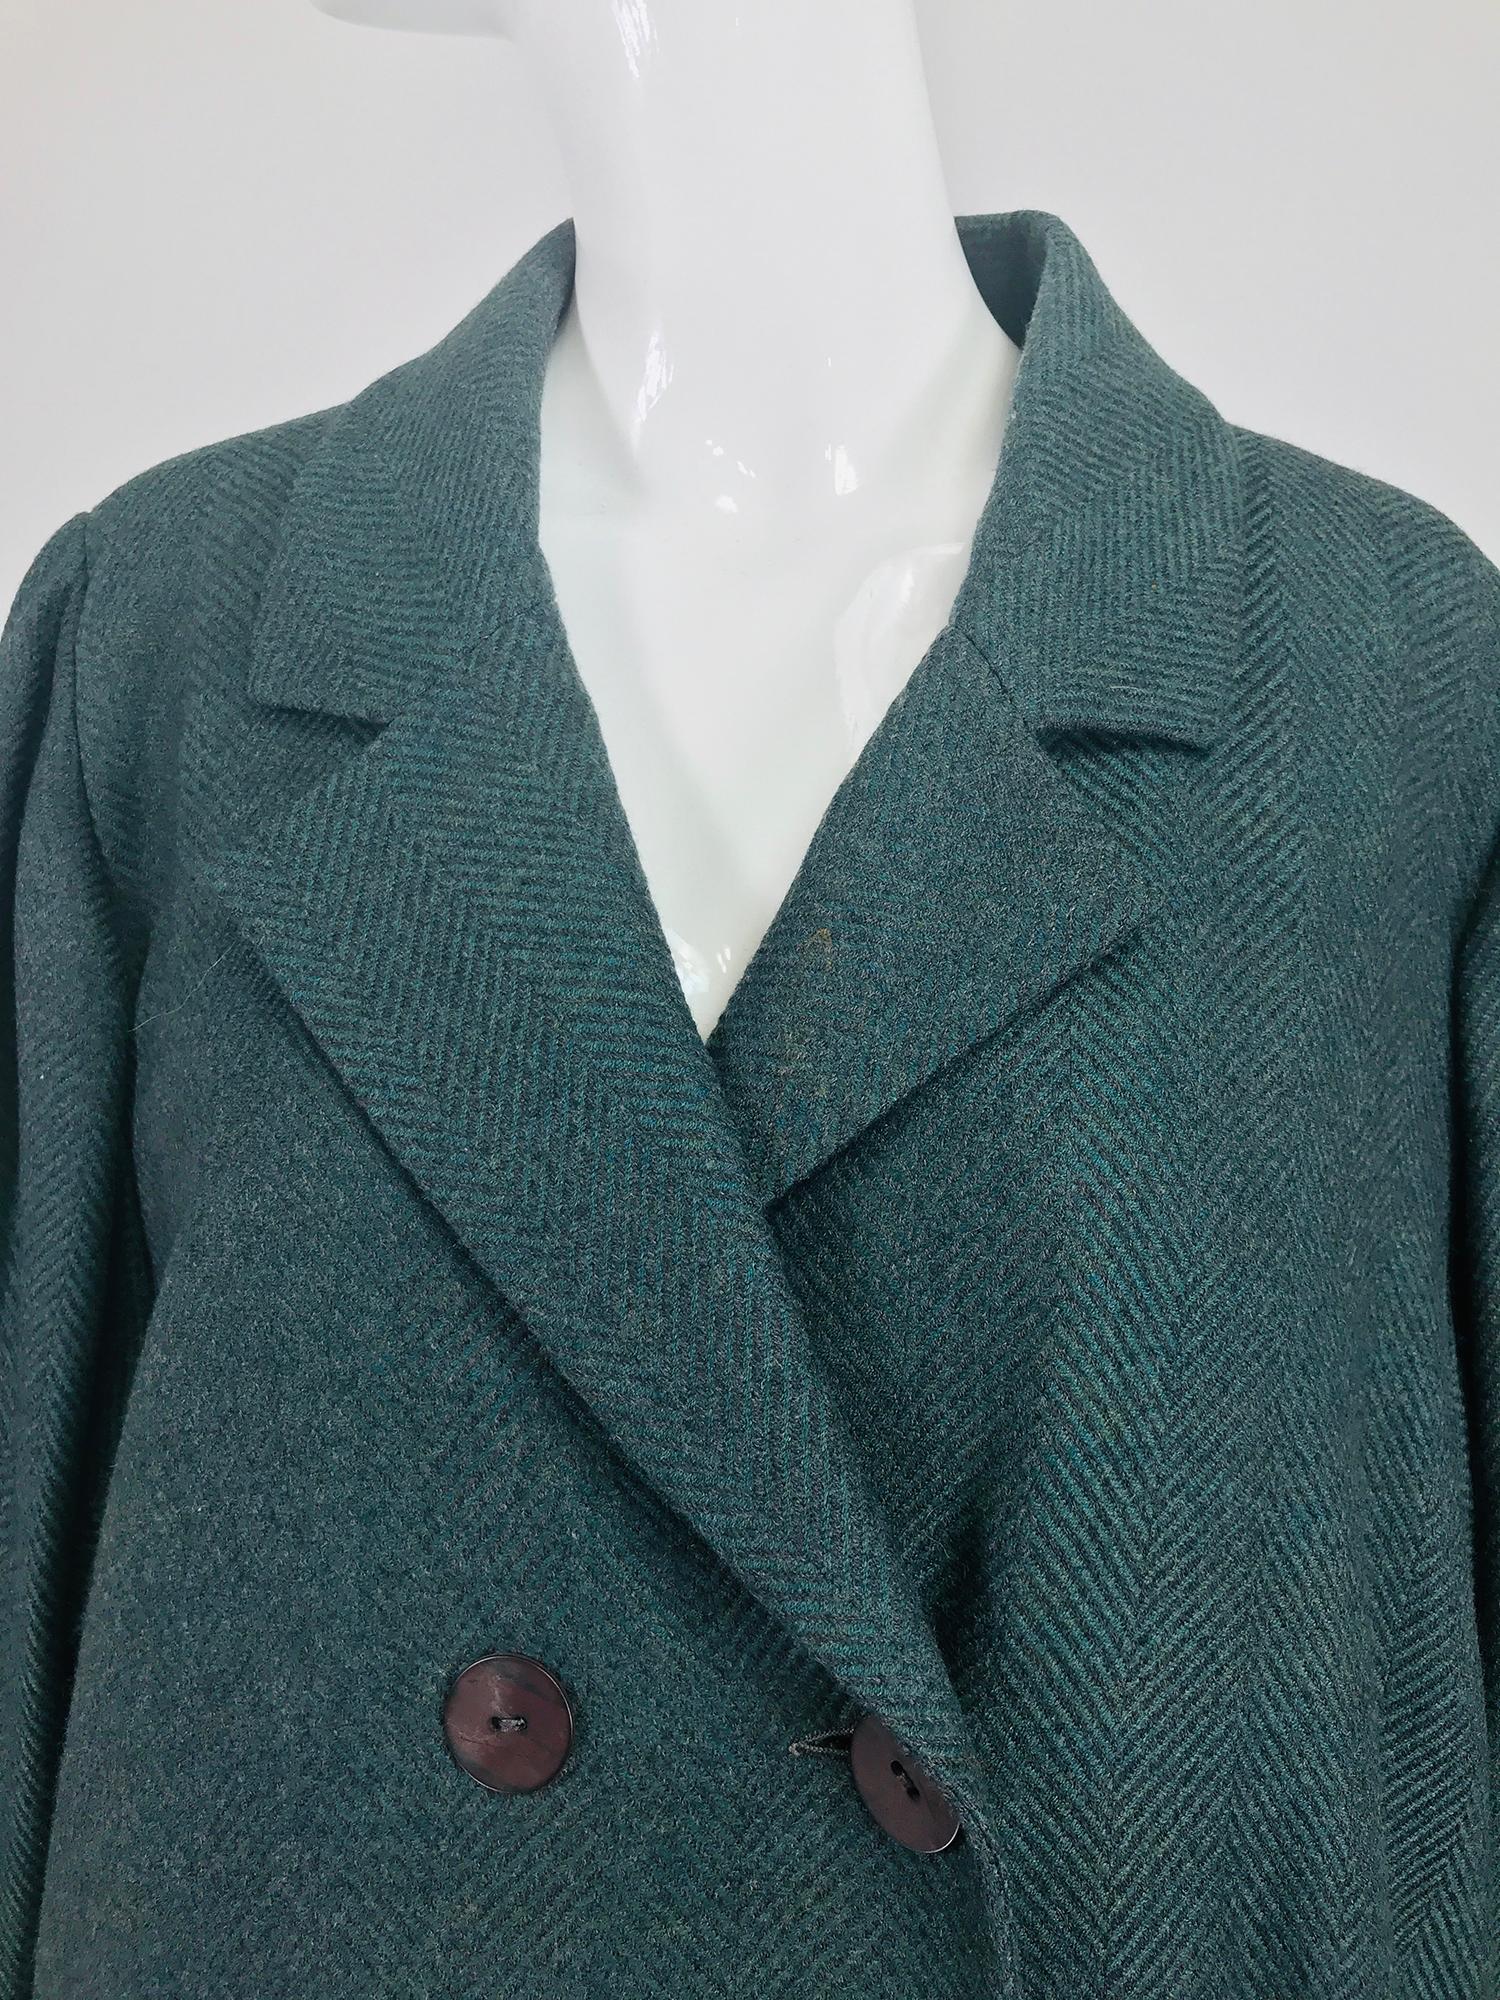 Chloe embroidered teal wool swing jacket and skirt from the 1980s 7